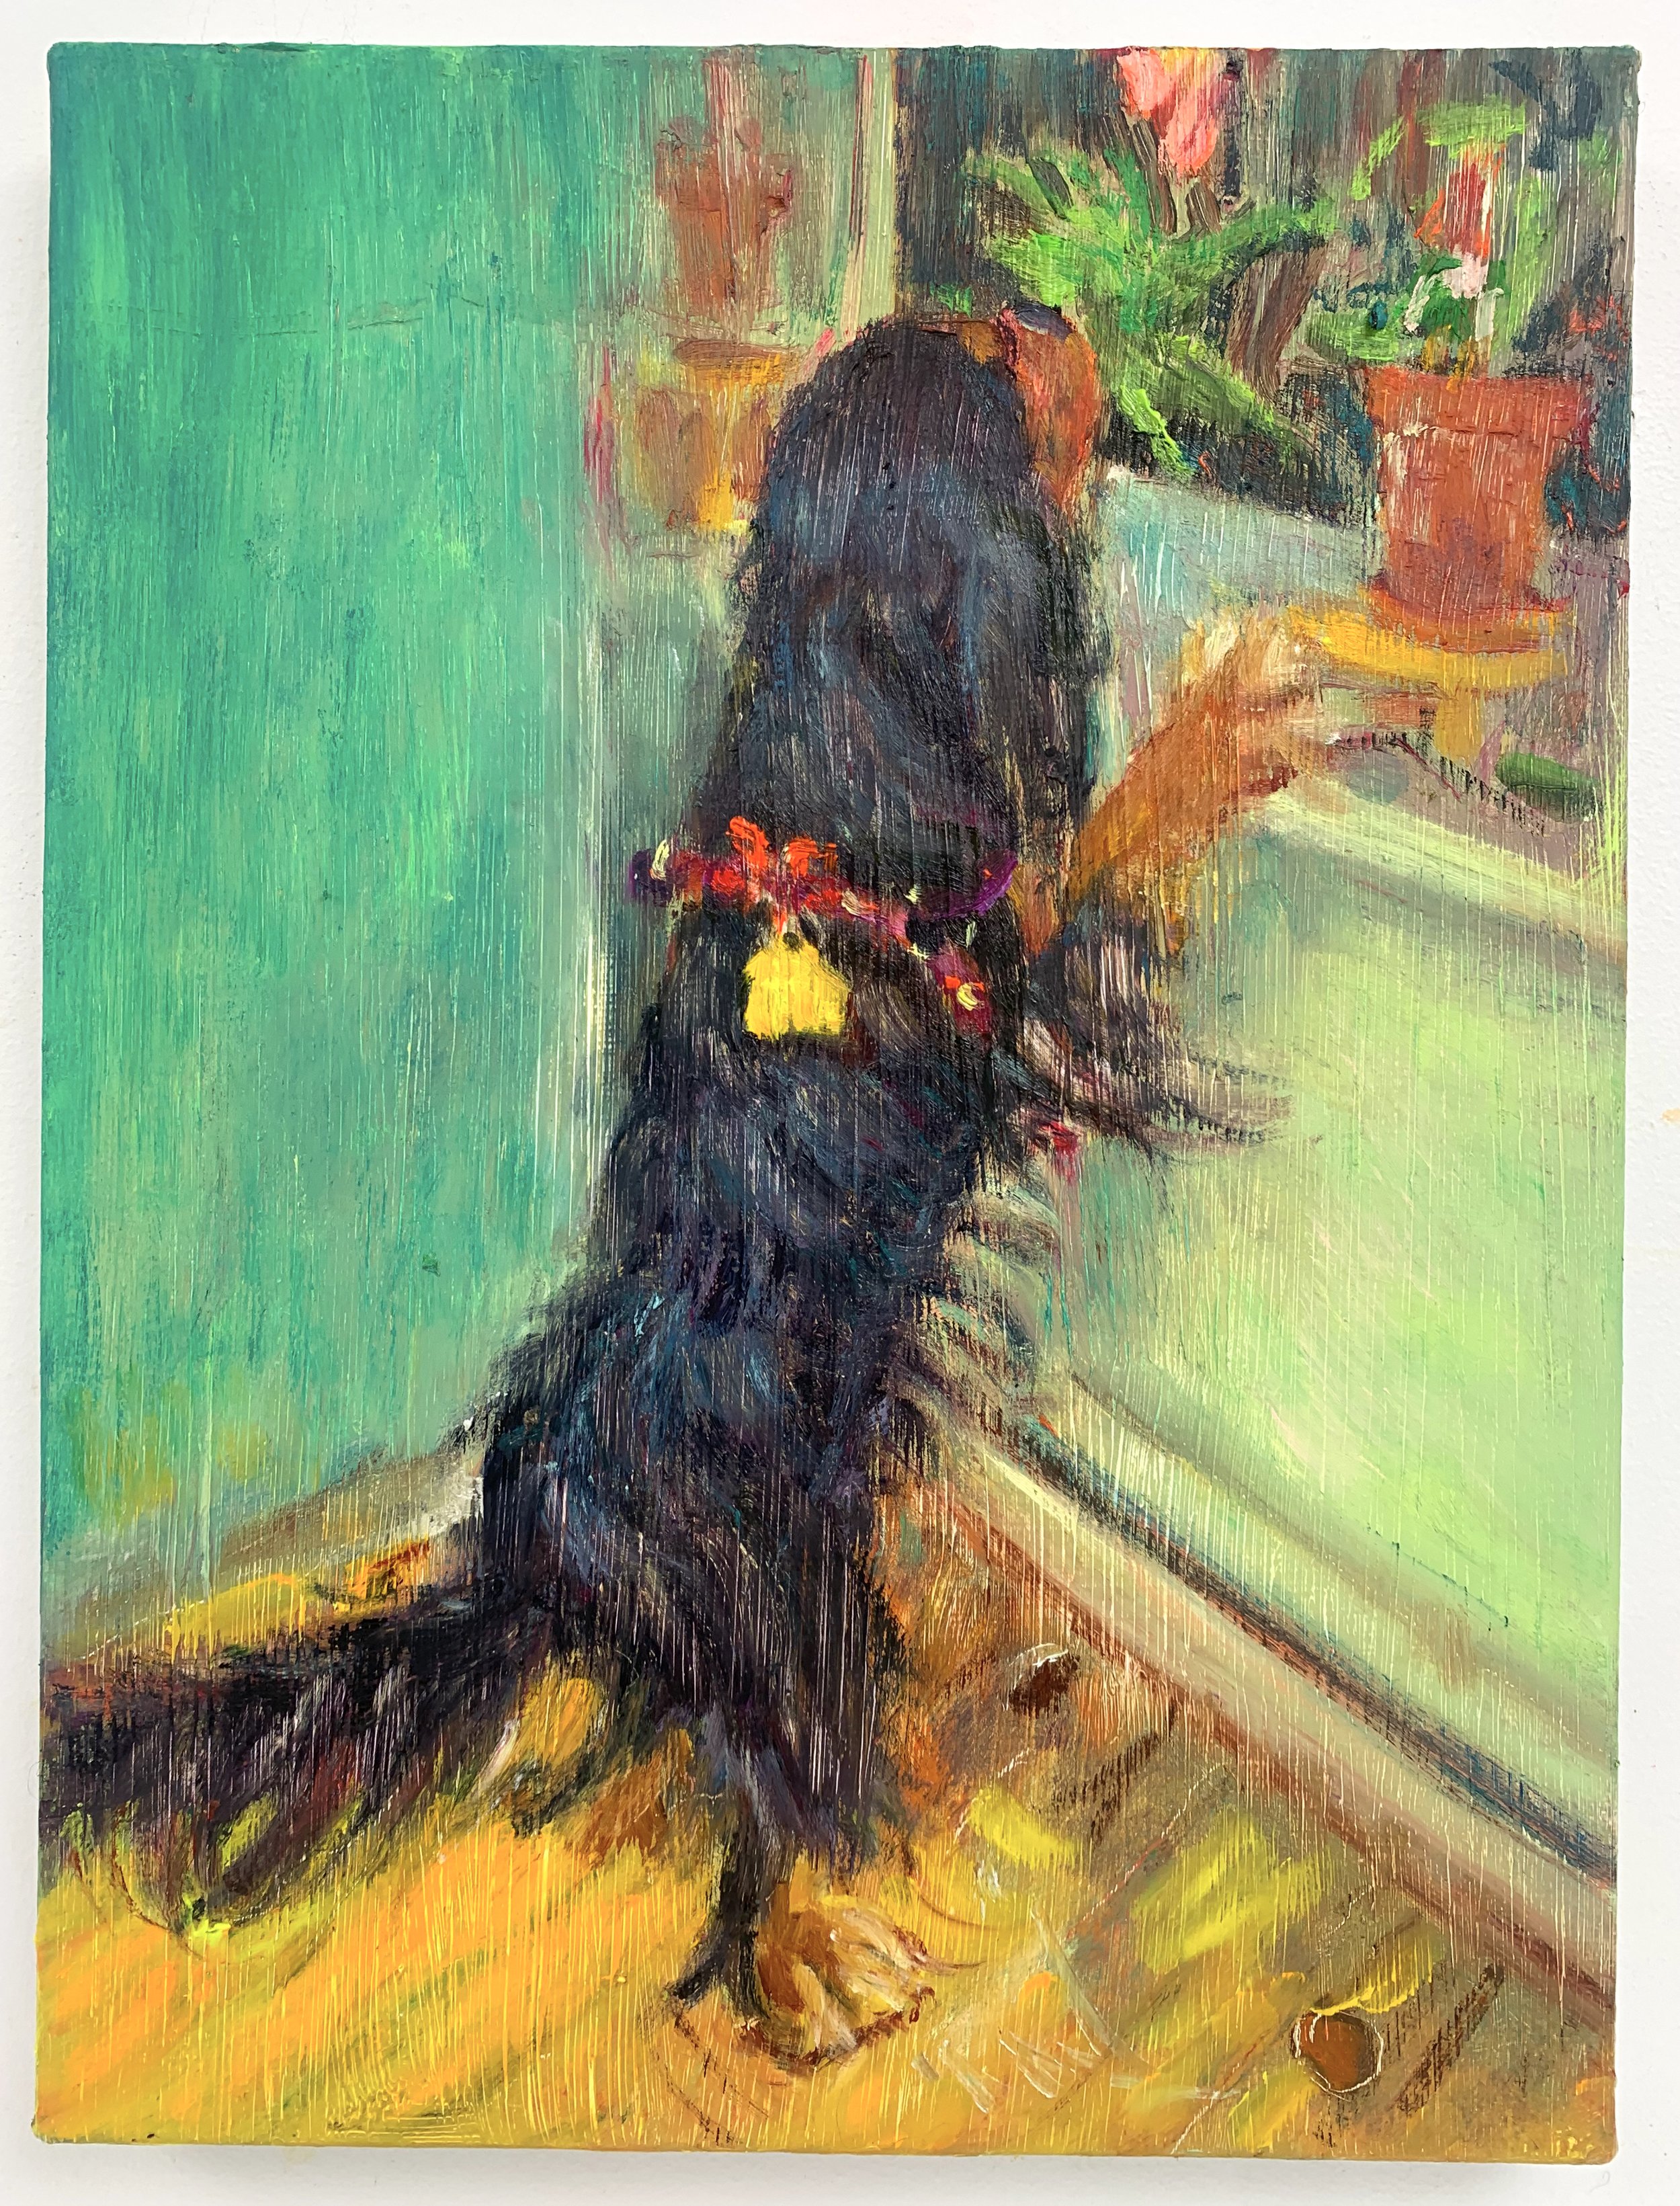  Curious Winnie, 2023  Oil on linen  16 x 12 inches 